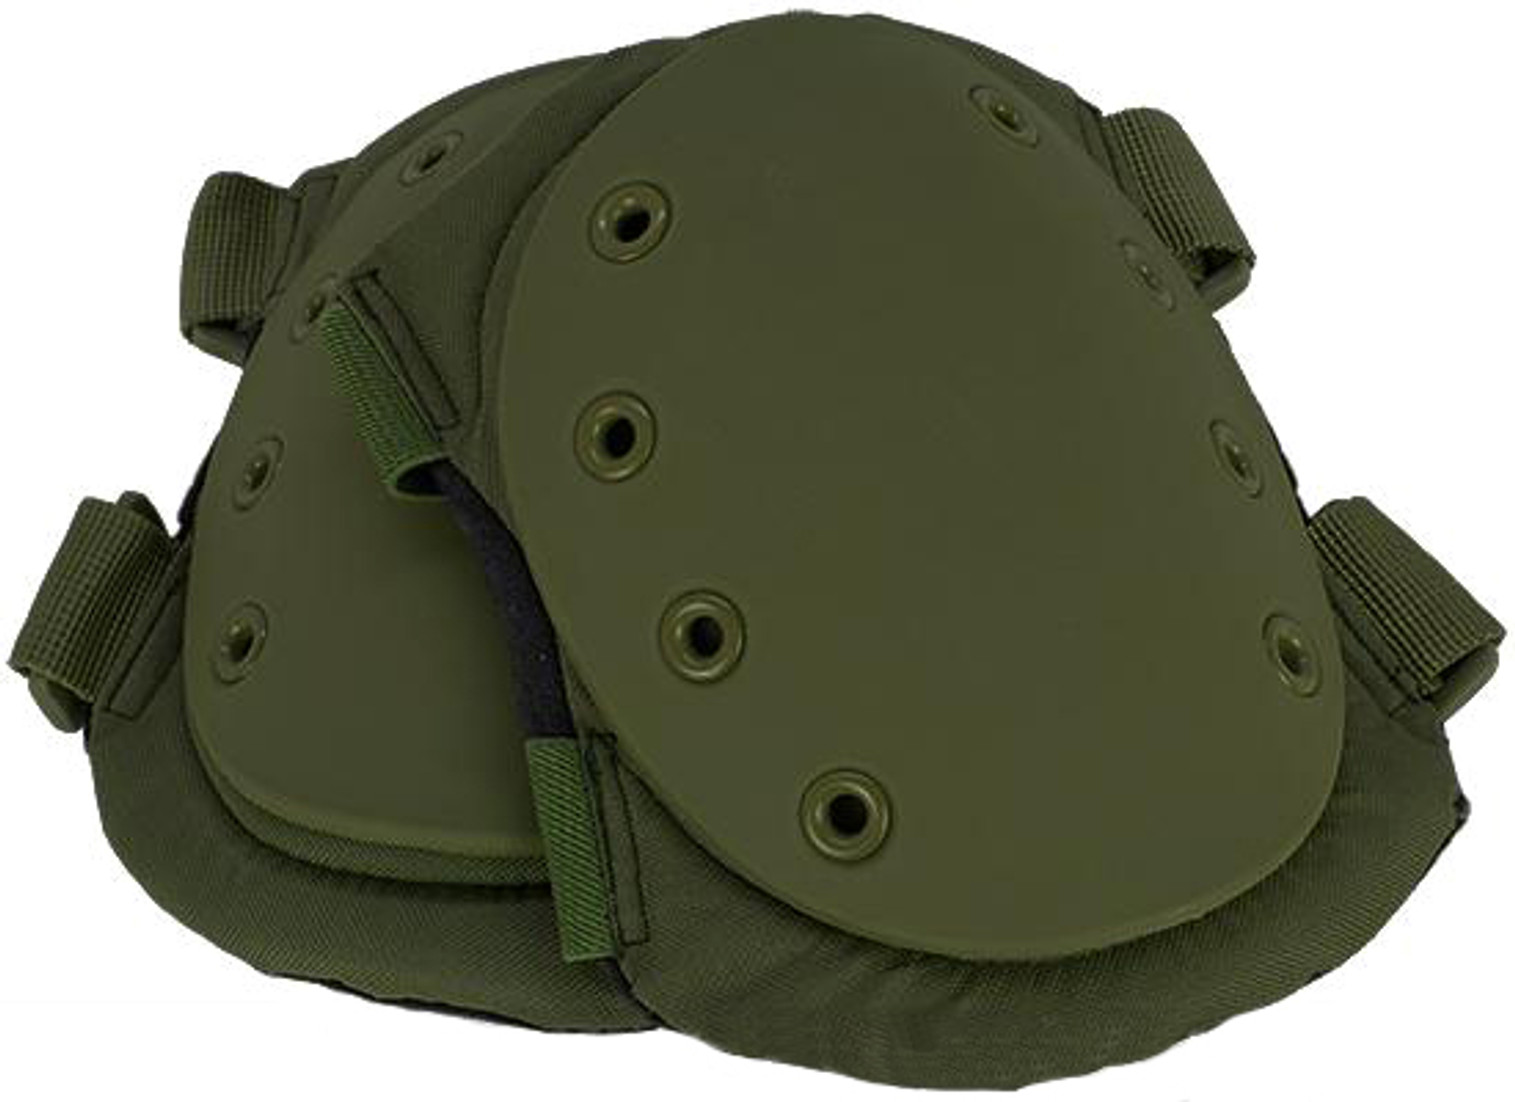 Avengers Special Operation Tactical Knee Pad Set (Color: OD Green)